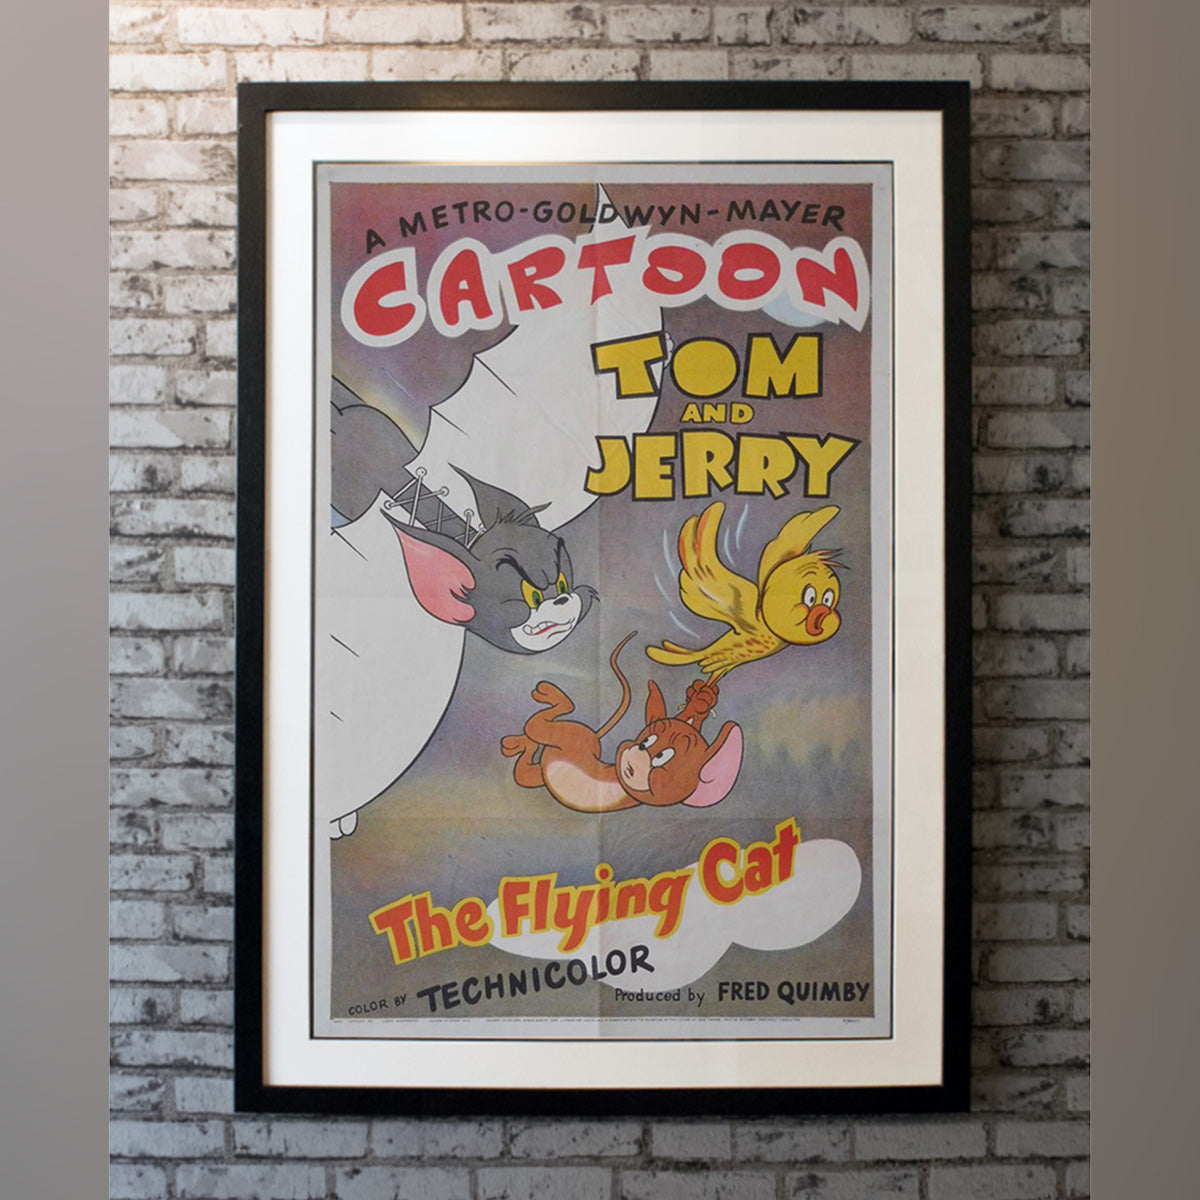 Original Movie Poster of Tom And Jerry: The Flying Cat (1952)